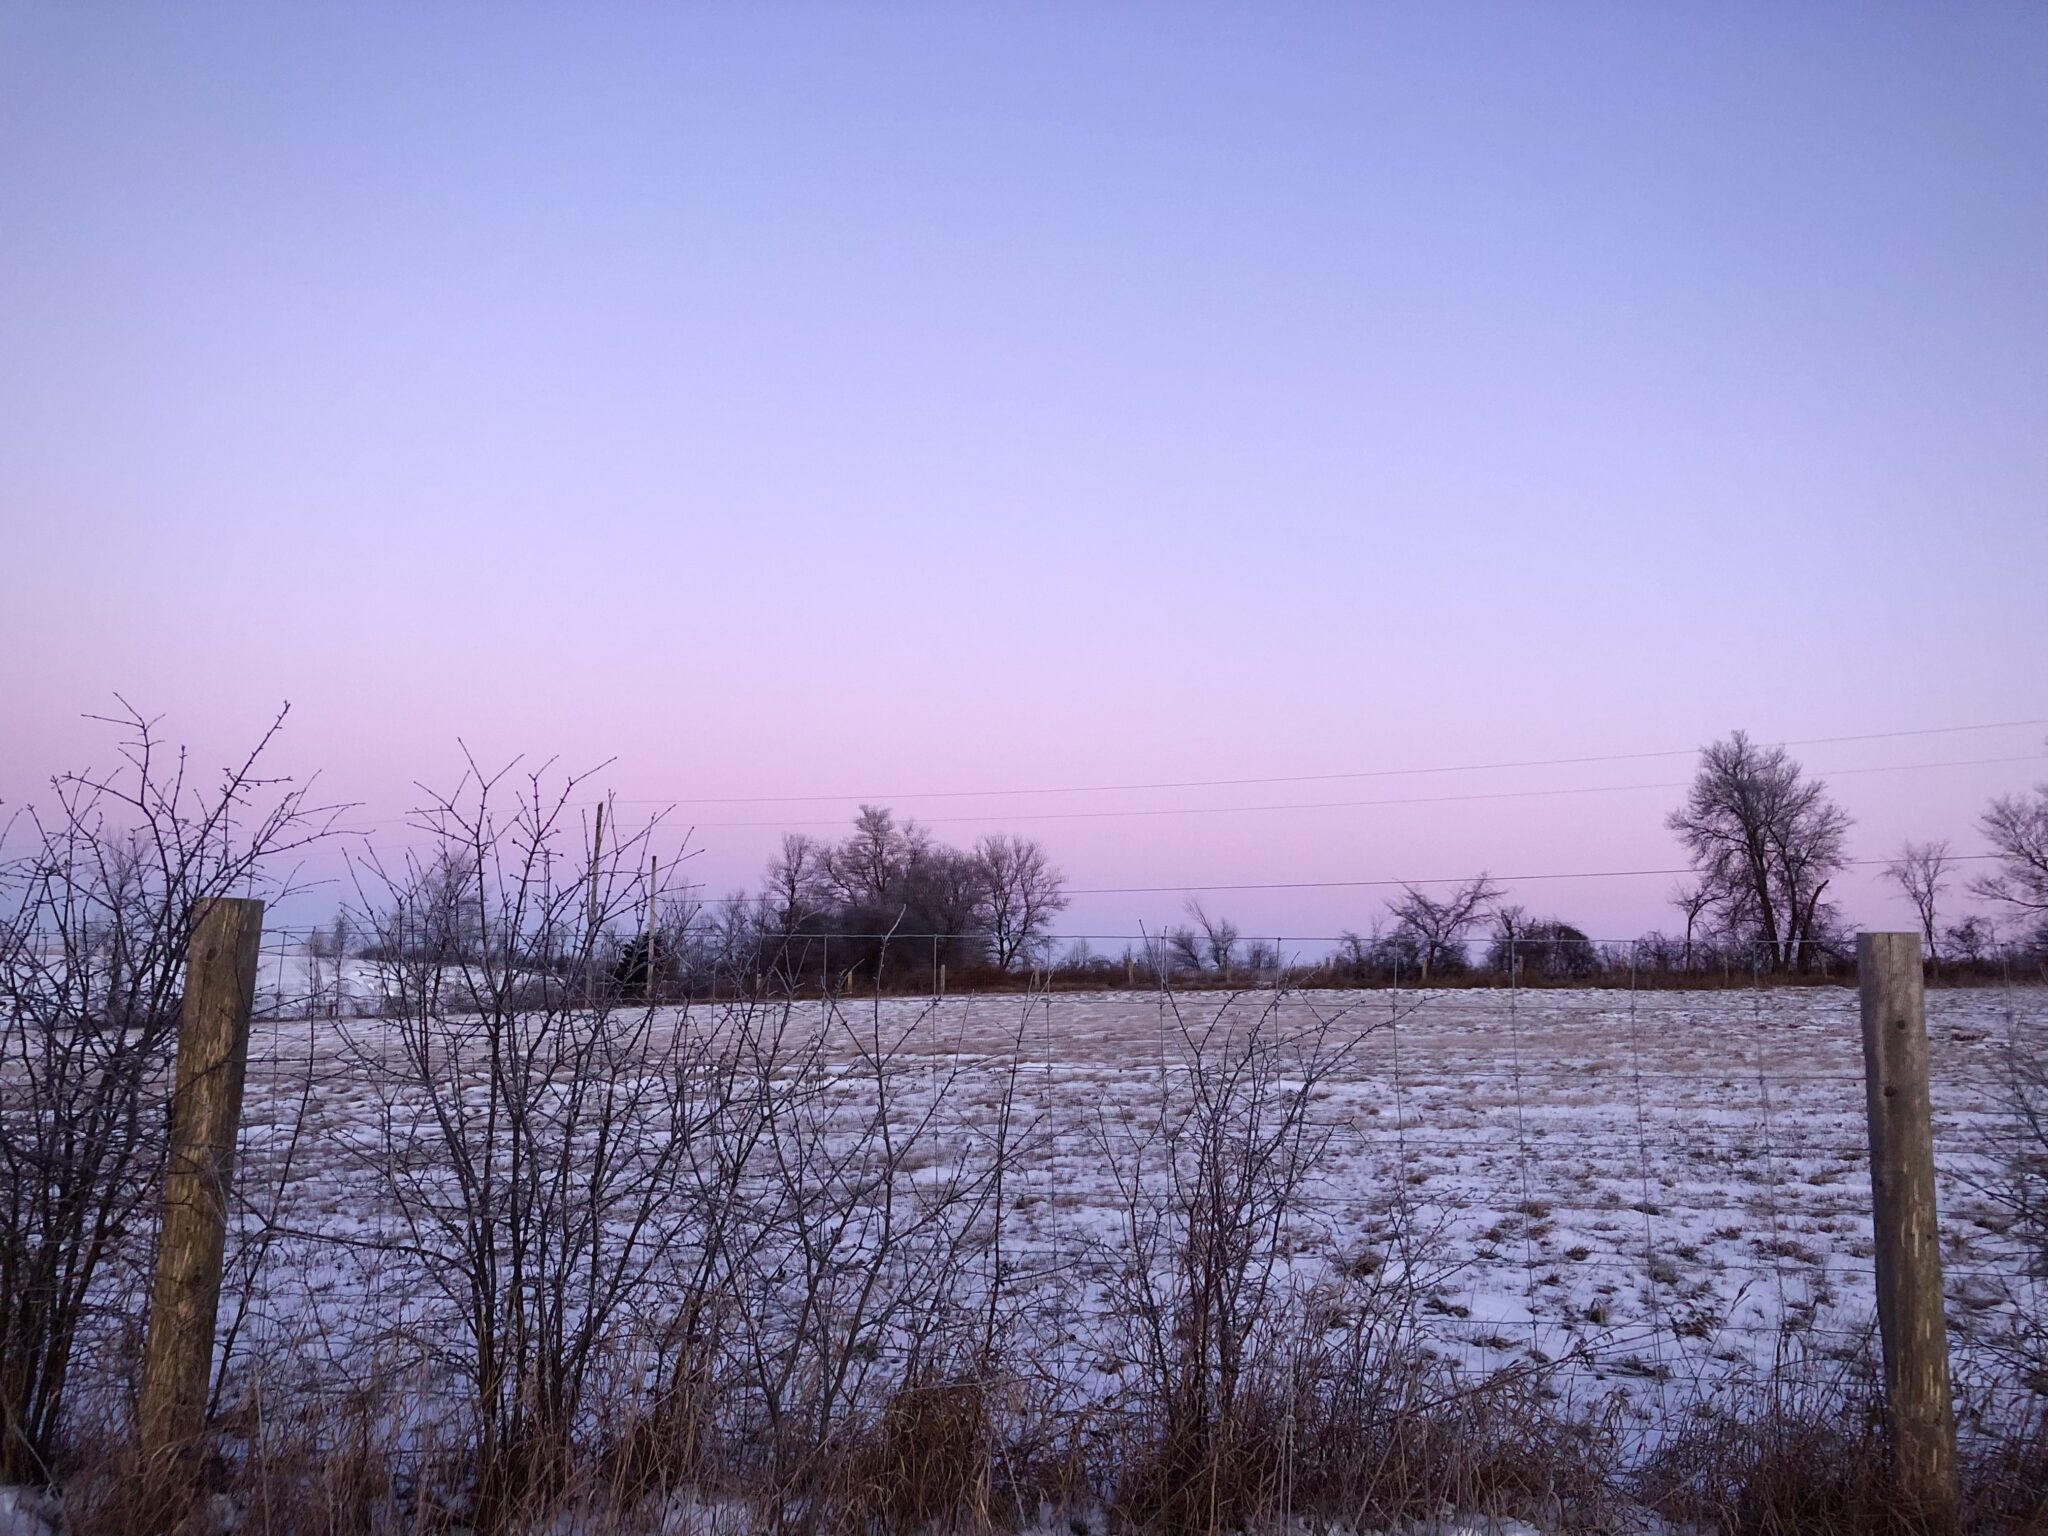 a snowy field at sunrise. in the forground, there is long grass, in the background, trees. the sky is light pink that fades into blue.